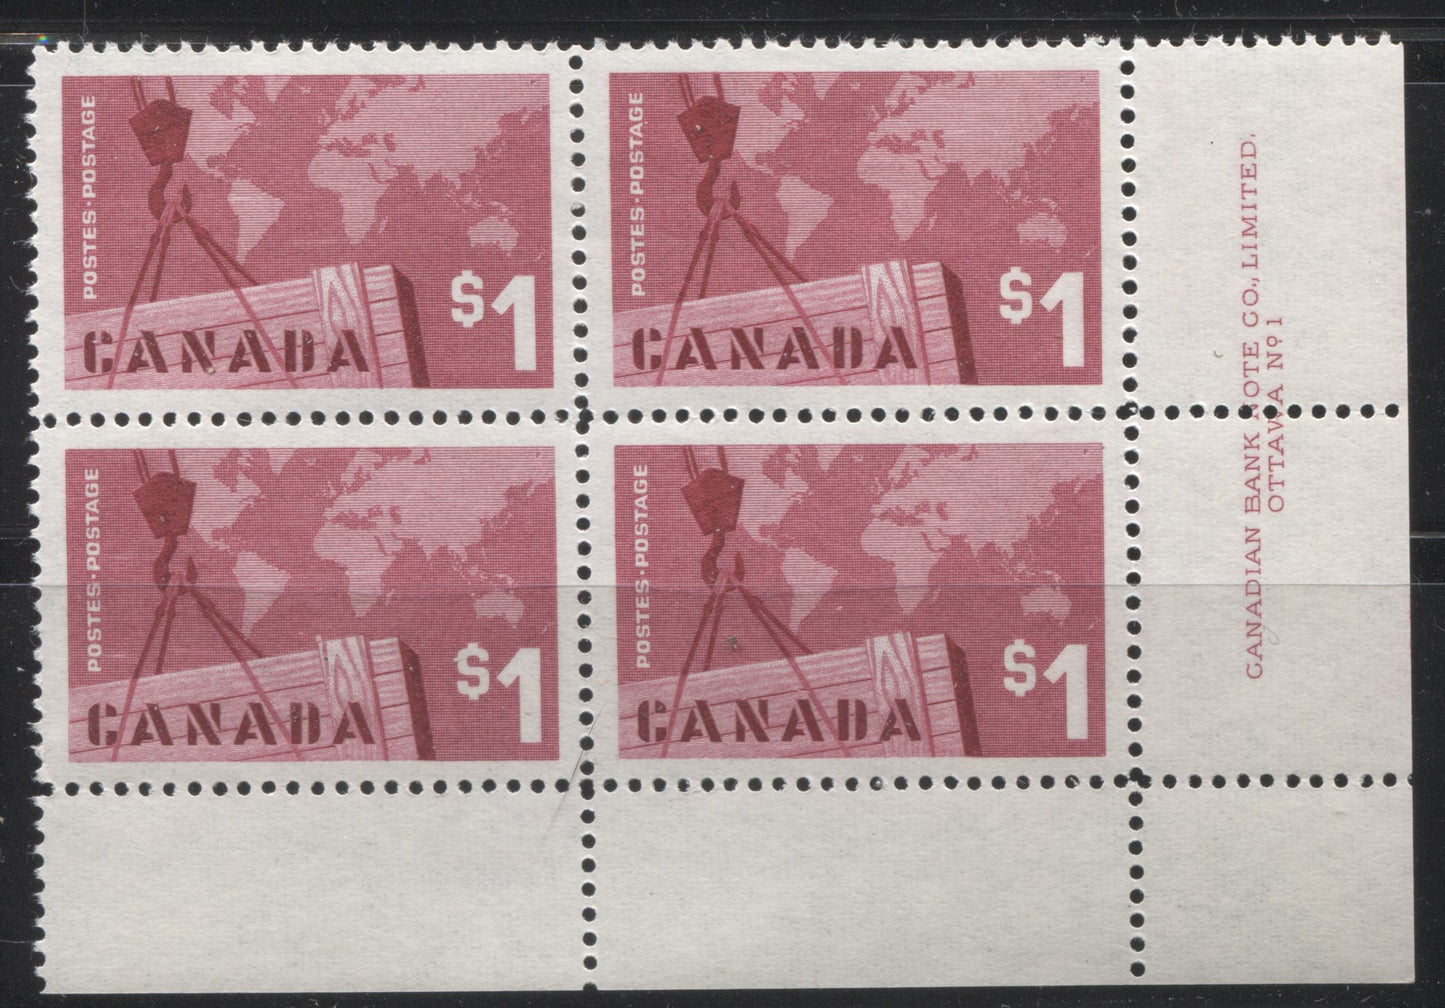 Lot 5 Canada #411 $1 Carmine Rose Crane & Map, 1963 Canadian Exports Issue, A VFNH LR Plate 1 Block Of 4, DF Paper With Light Vertical Ribbing